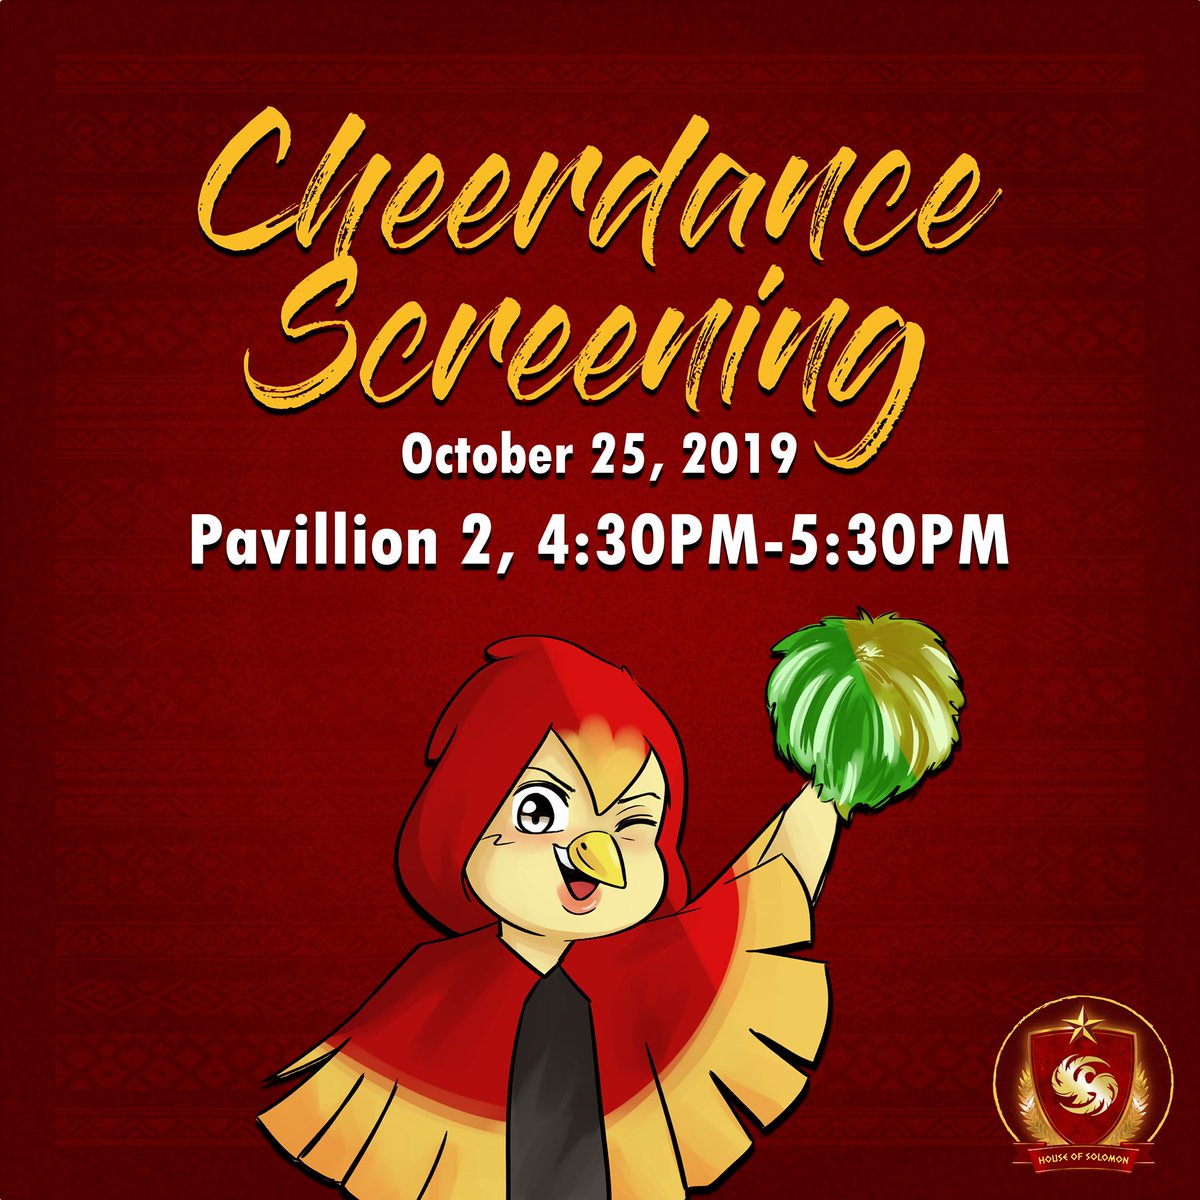 HEY SOLOMONIANS!

THE DAY IS HERE!

The try-outs for House Solomon's Pepsquad (Cheerdance) will be held tomorrow October 25th, from 4:30PM-5:30PM at Pavillion 2!

LET'S SEE WHAT YOU GOT FELLOW SOLOMONIANS!

*Below is the list of requirements to be brought/accomplished tomorrow.